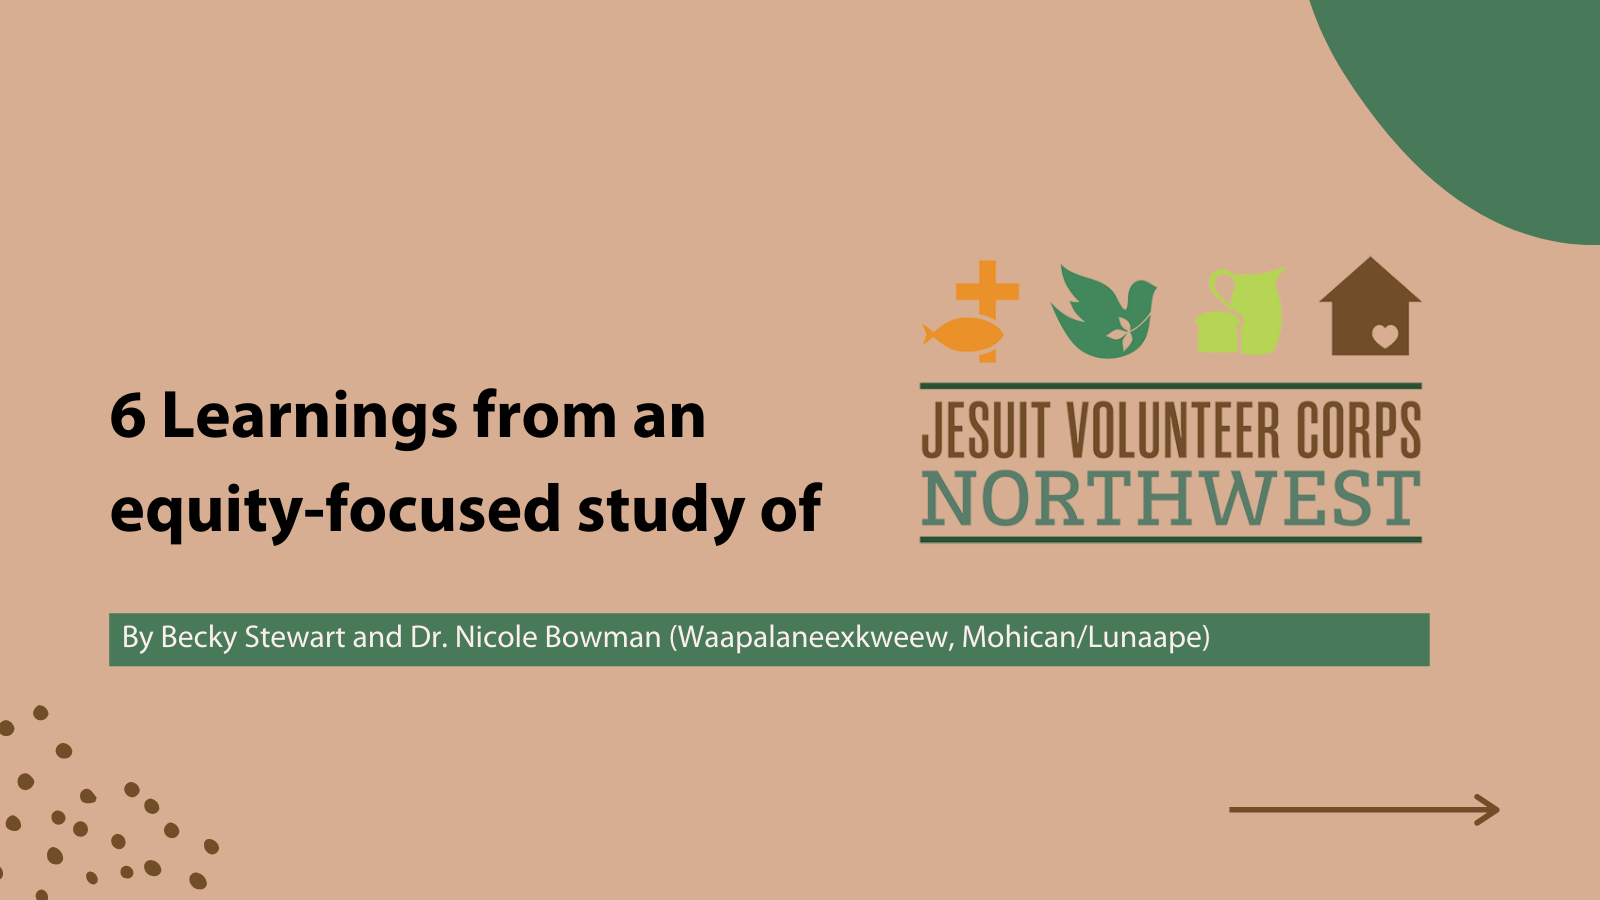 A graphic image that says "6 Learnings from an equity-focused study of Jesuit Volunteer Corps Northwest"